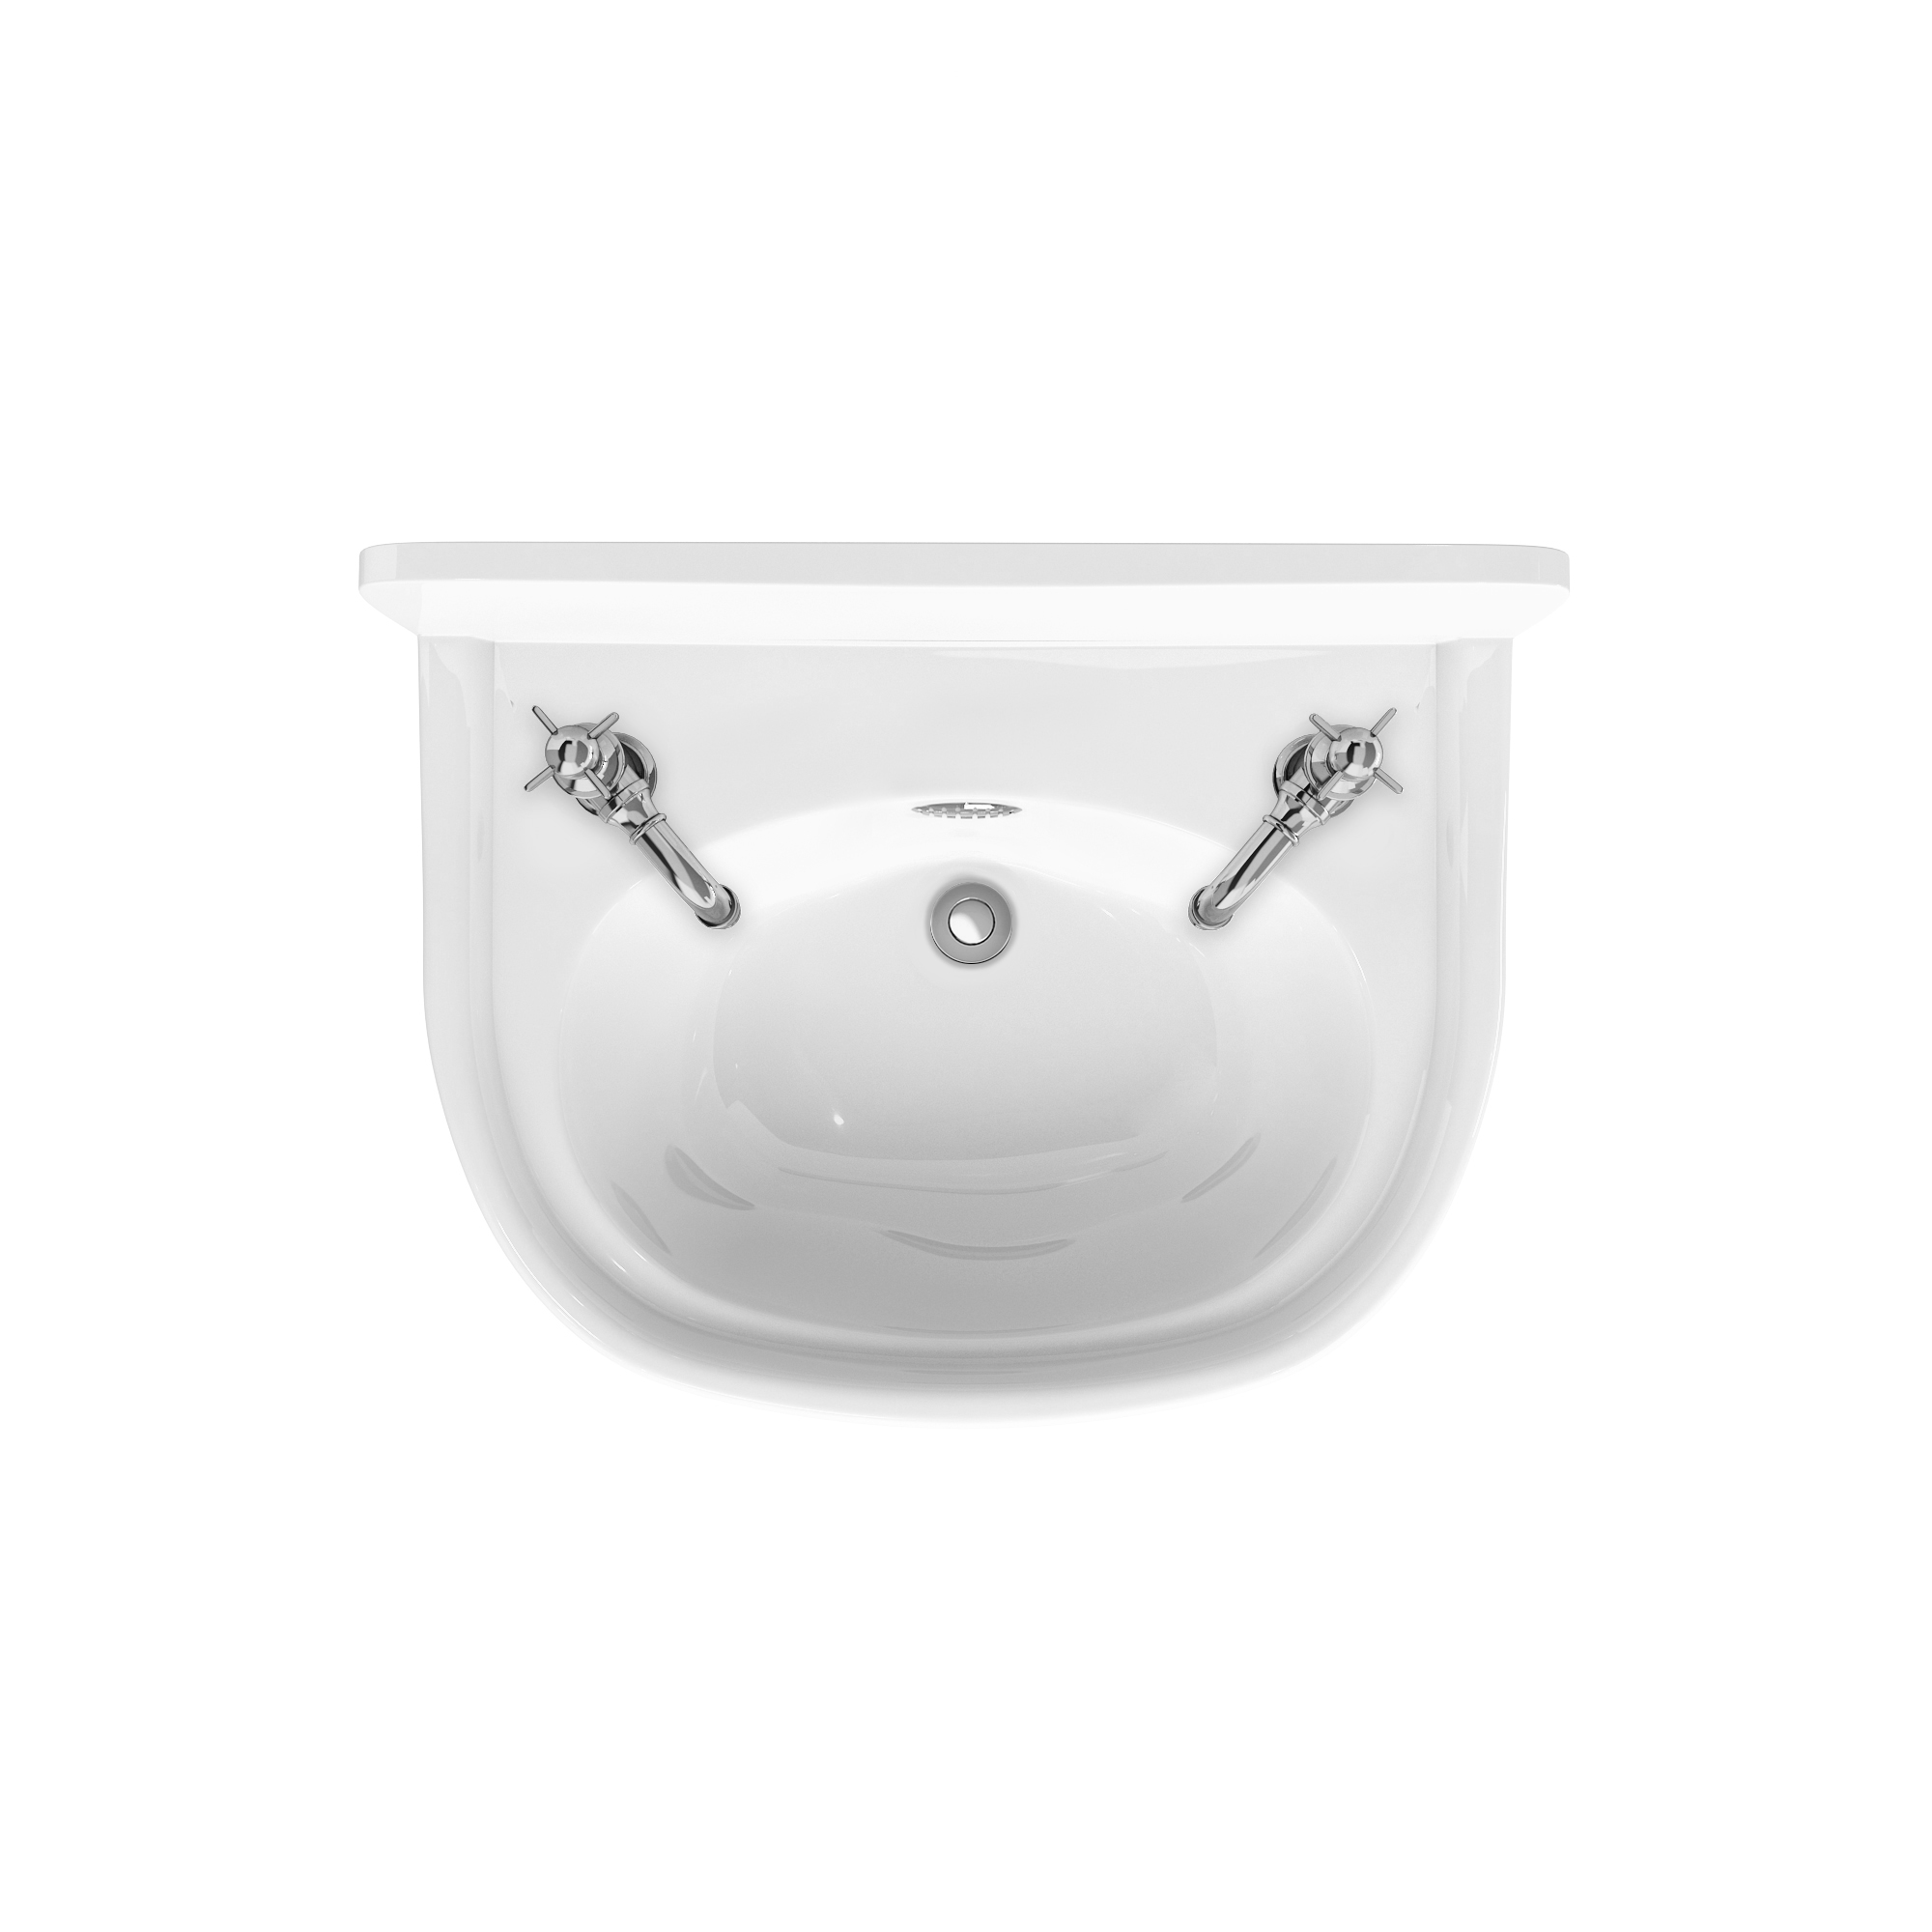 Arcade 500mm cloakroom basin with chrome overflow